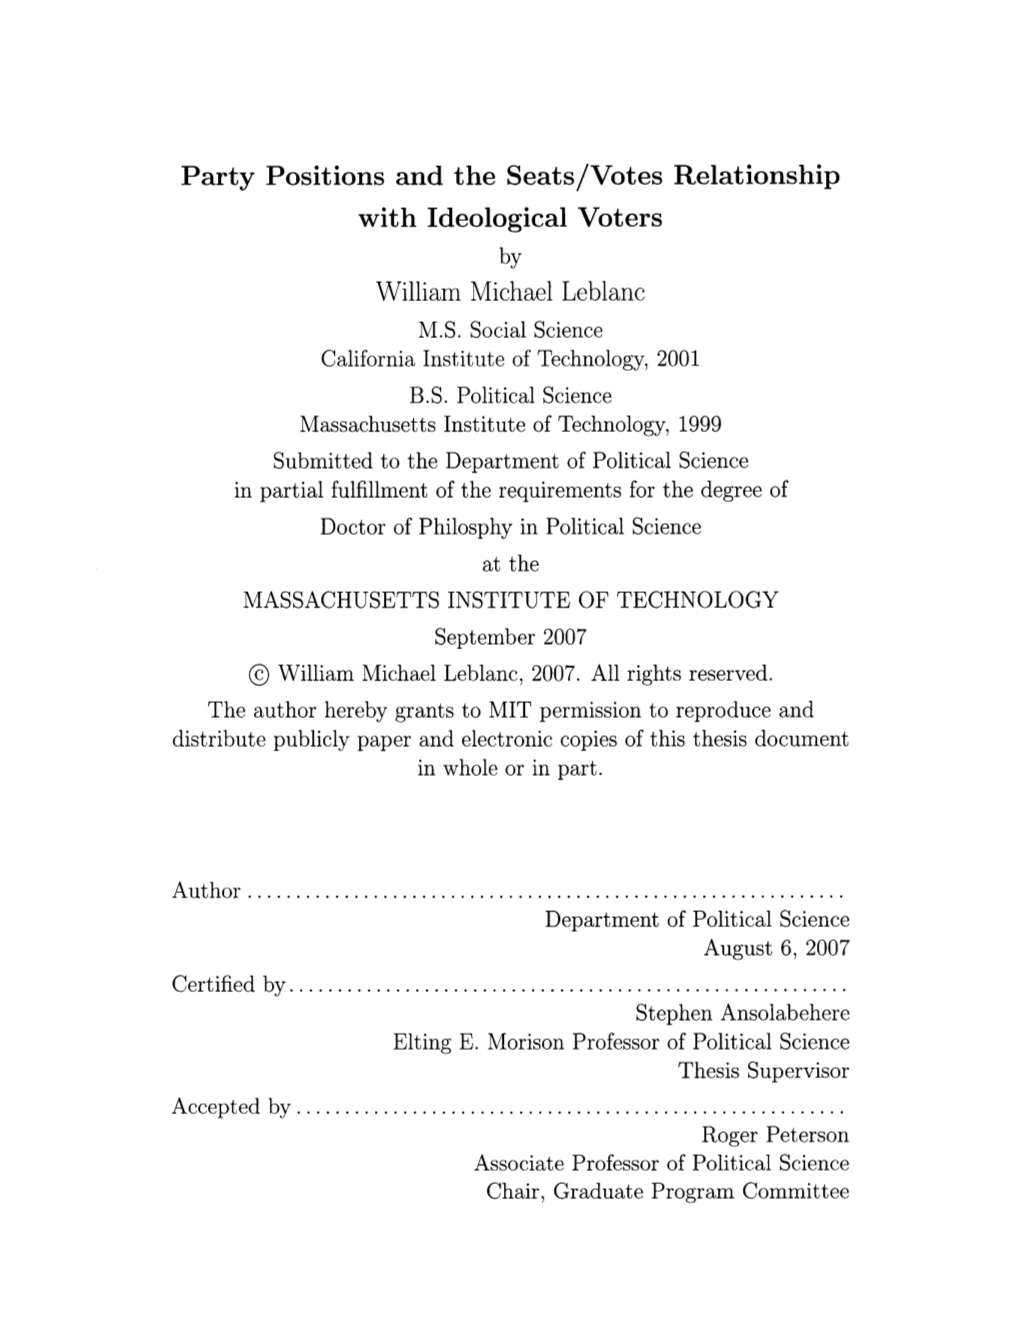 Party Positions and the Seats/Votes Relationship with Ideological Voters by William Michael Leblanc M.S